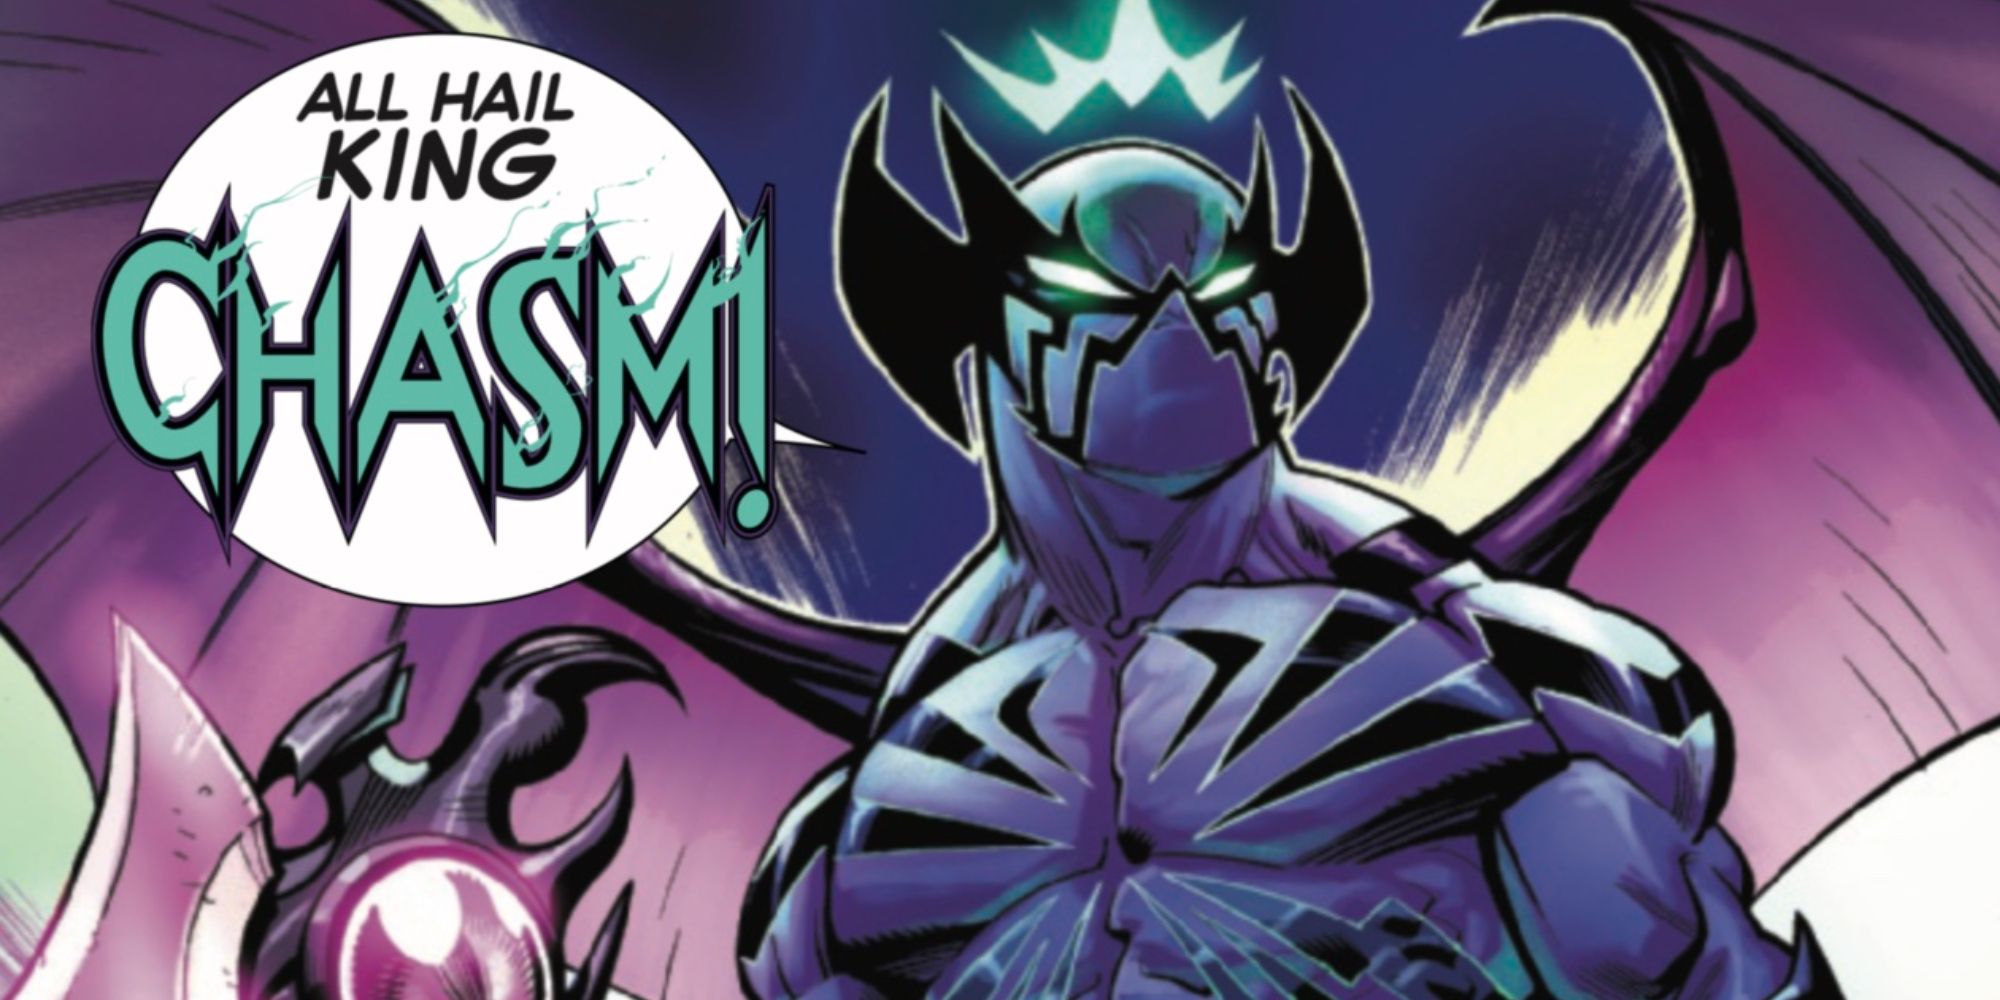 King Chasm in the comics